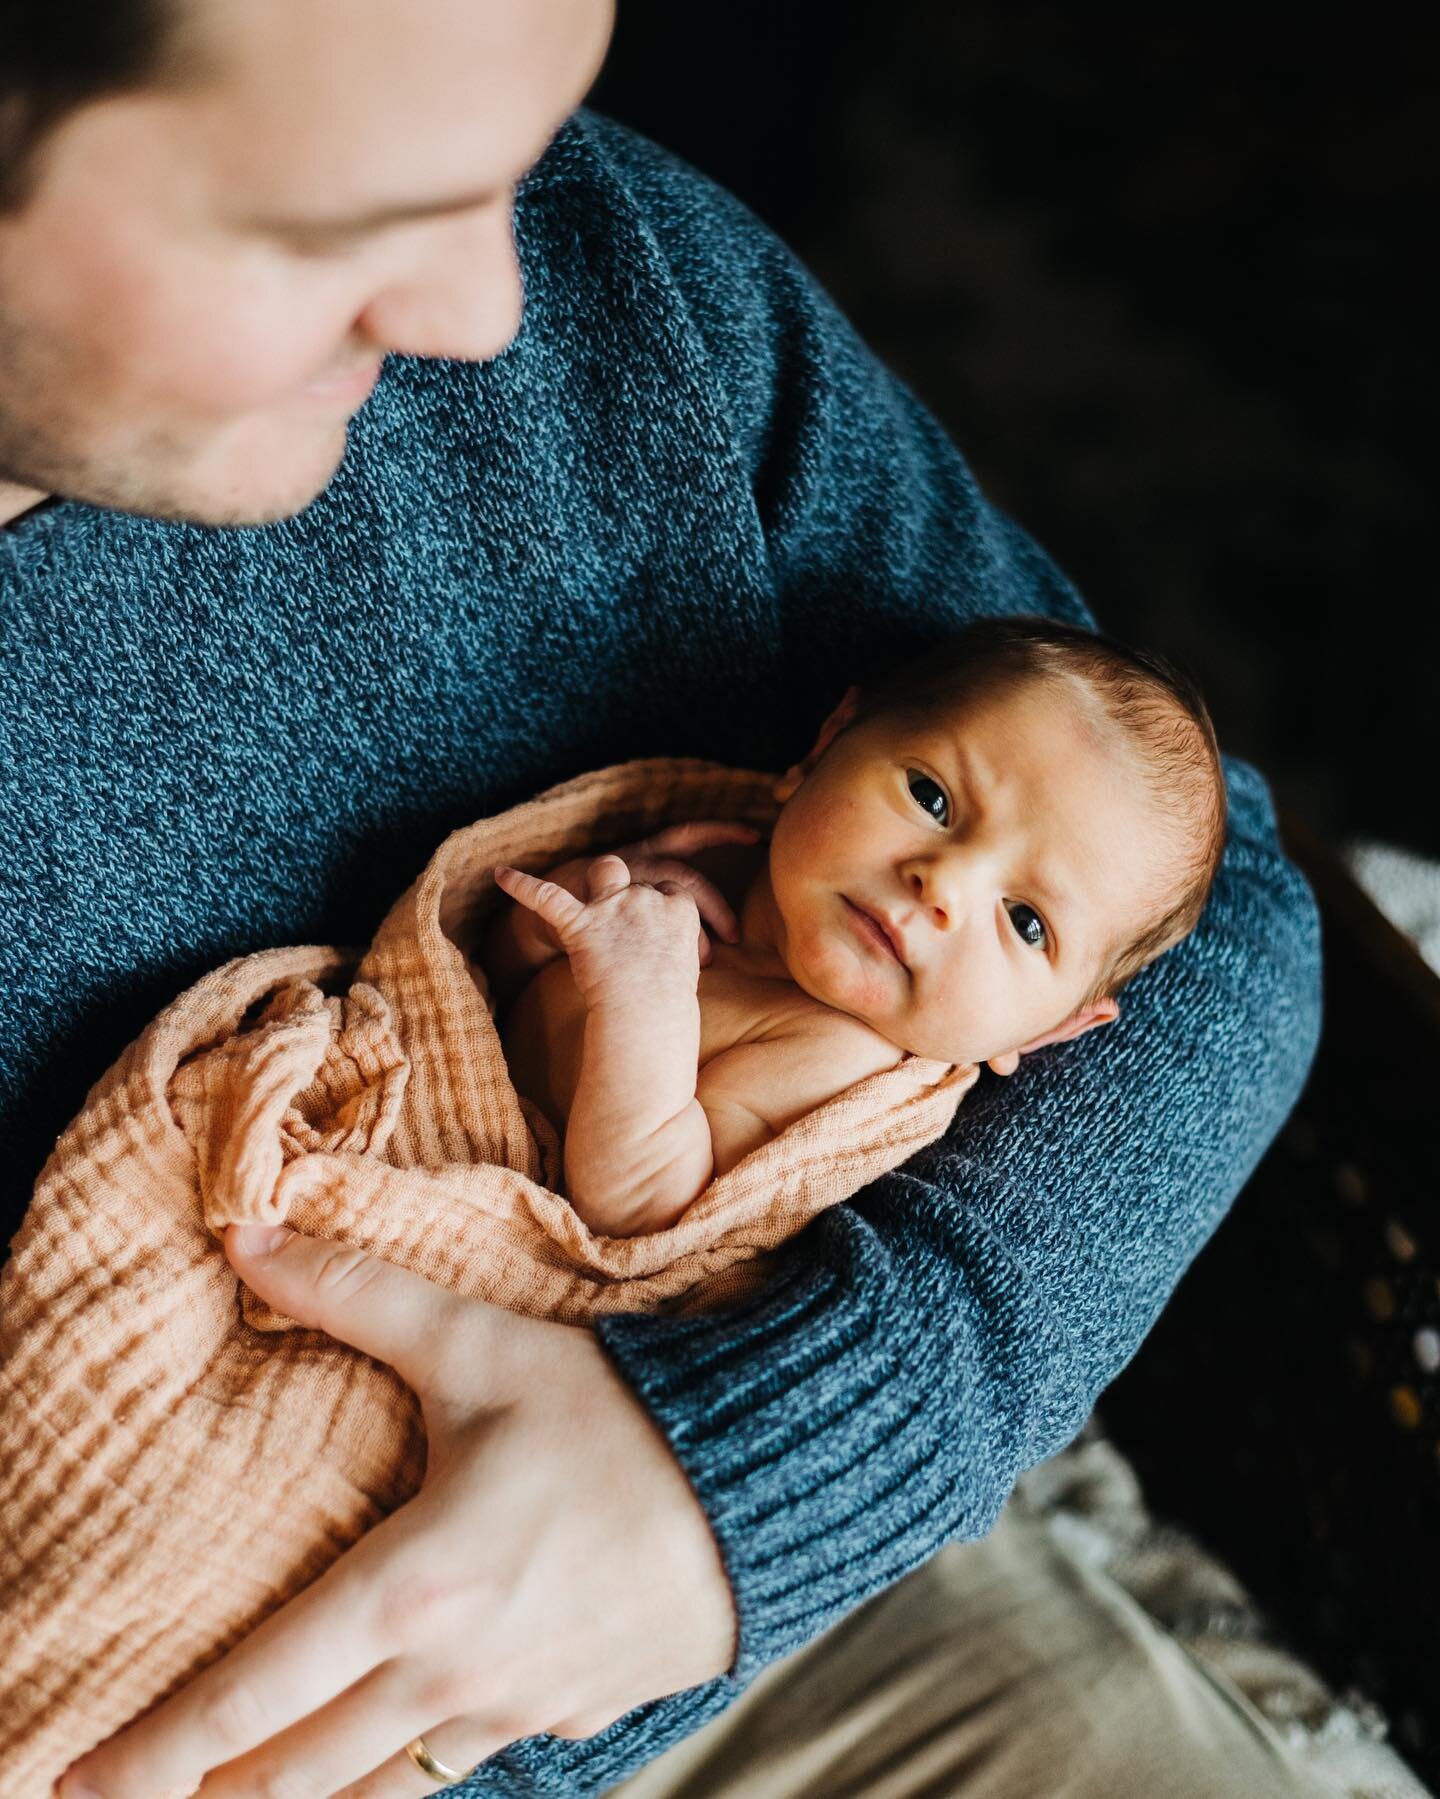 Anyone else still sad the Chiefs weren&rsquo;t playing last night? Us too. Here&rsquo;s some cute baby photos to cheer all of us up.

Side note: in-home newborn sessions are some of our absolute fave! If you&rsquo;re looking for your baby to be wrapp